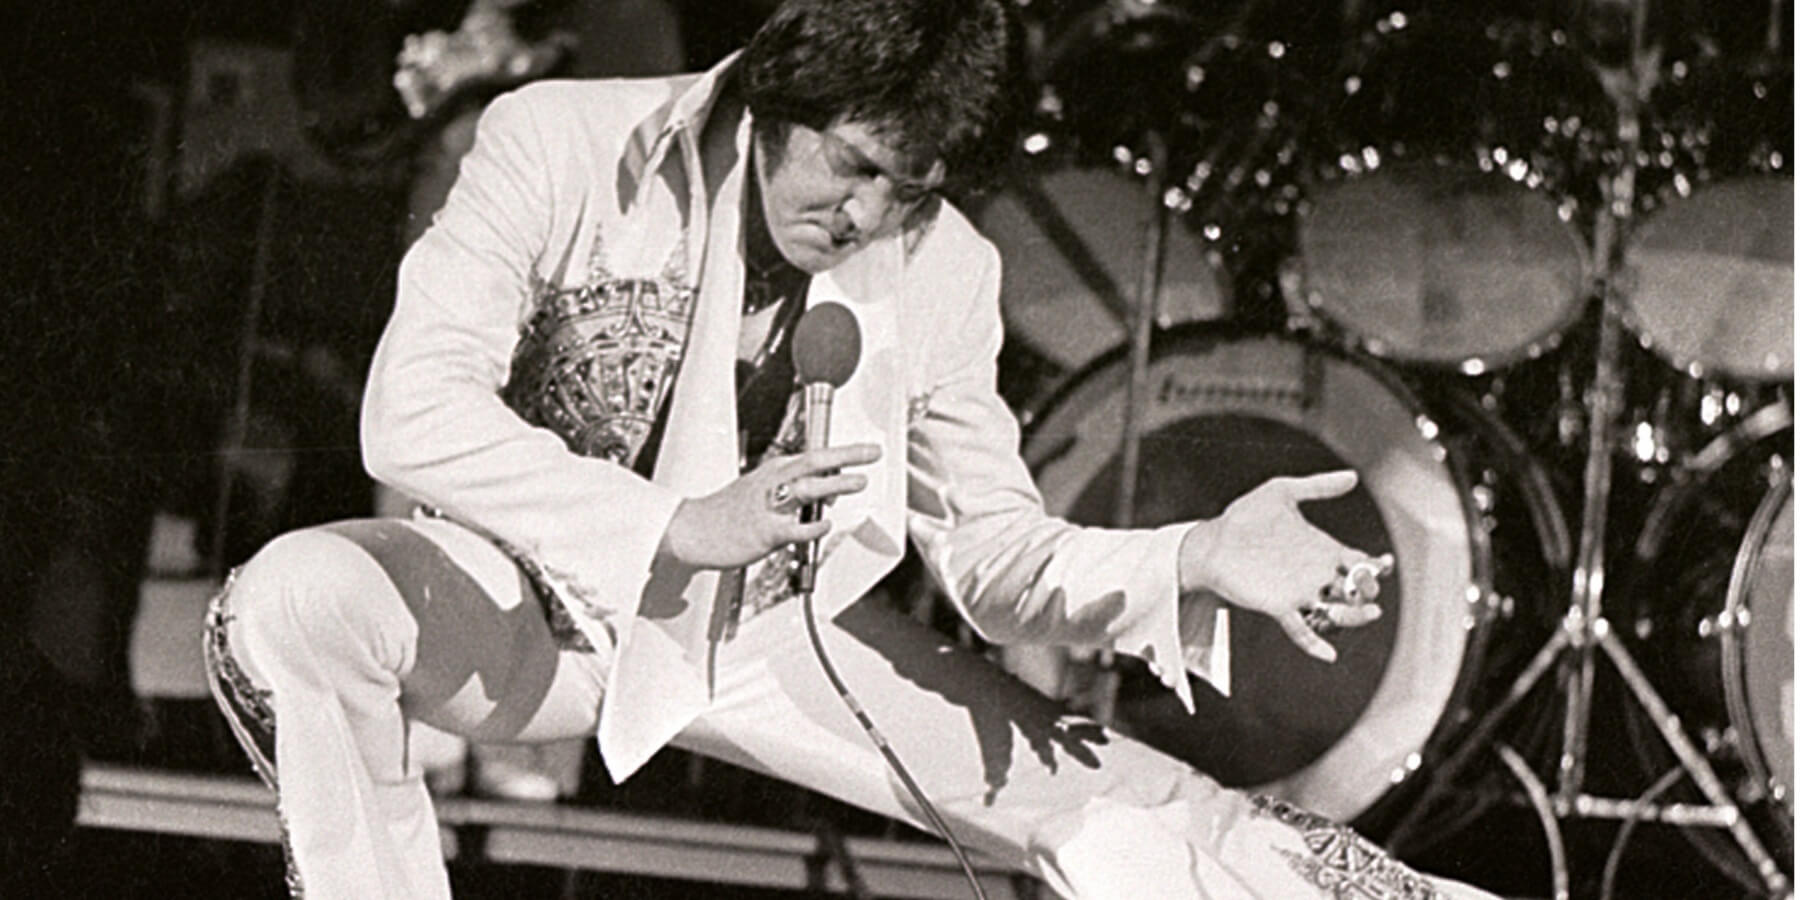 Elvis Presley in concert in April 1977, four months before his death at the age of 42.